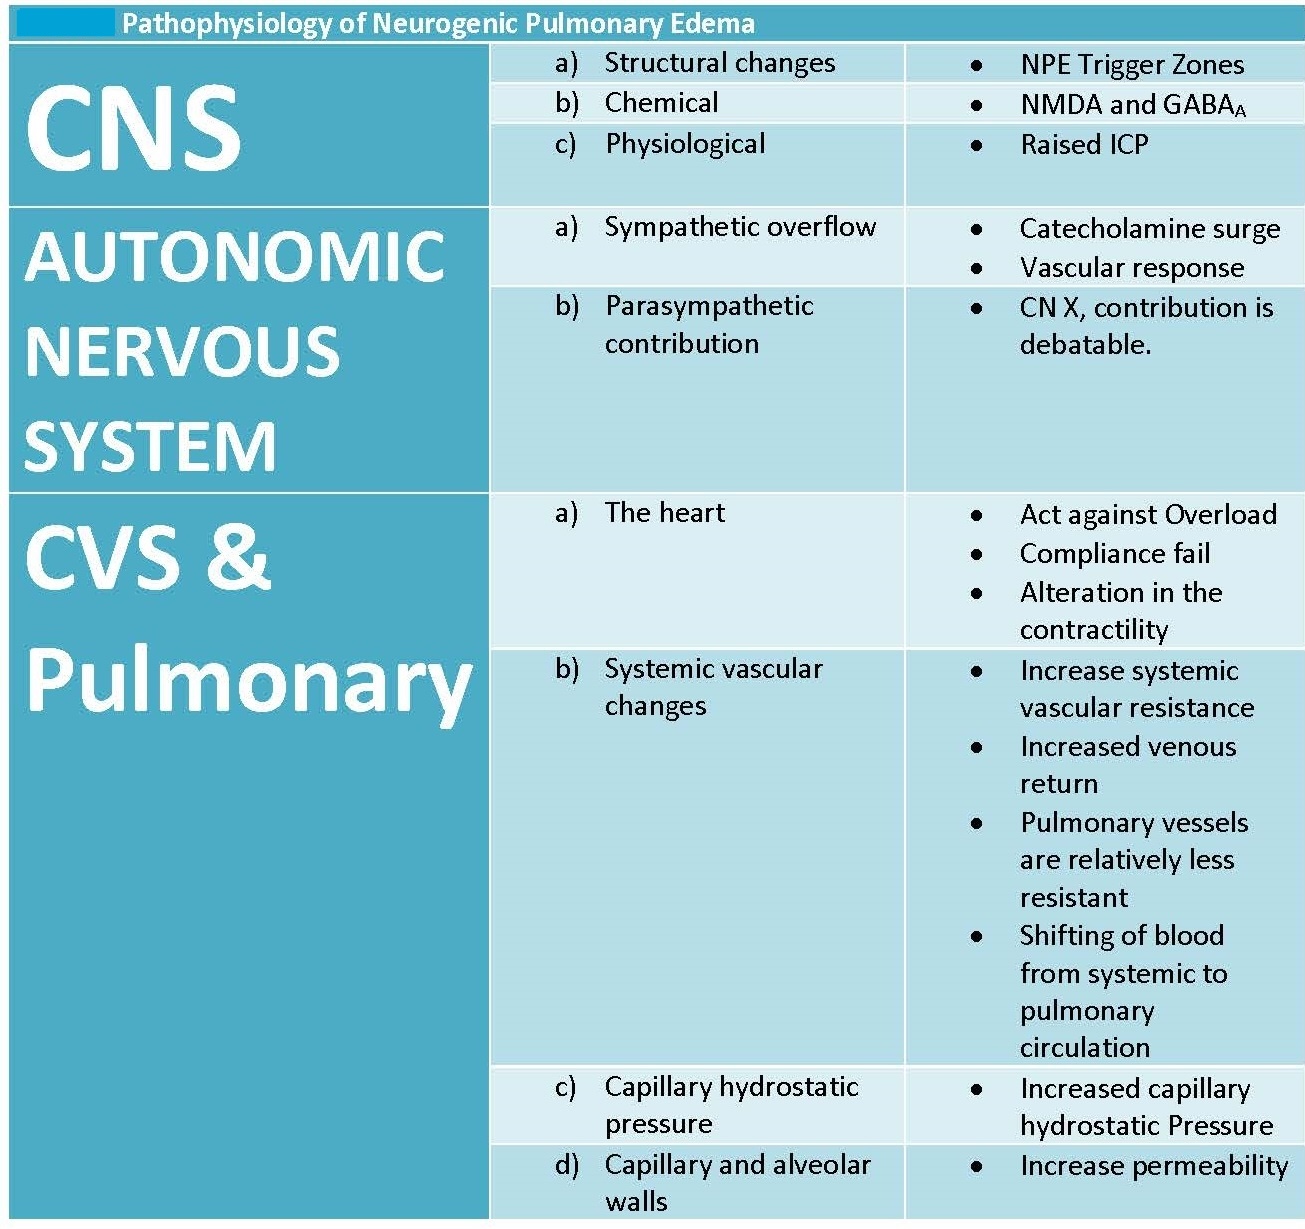 <p>Key Features in the Pathophysiology of Neurogenic Pulmonary Edema</p>